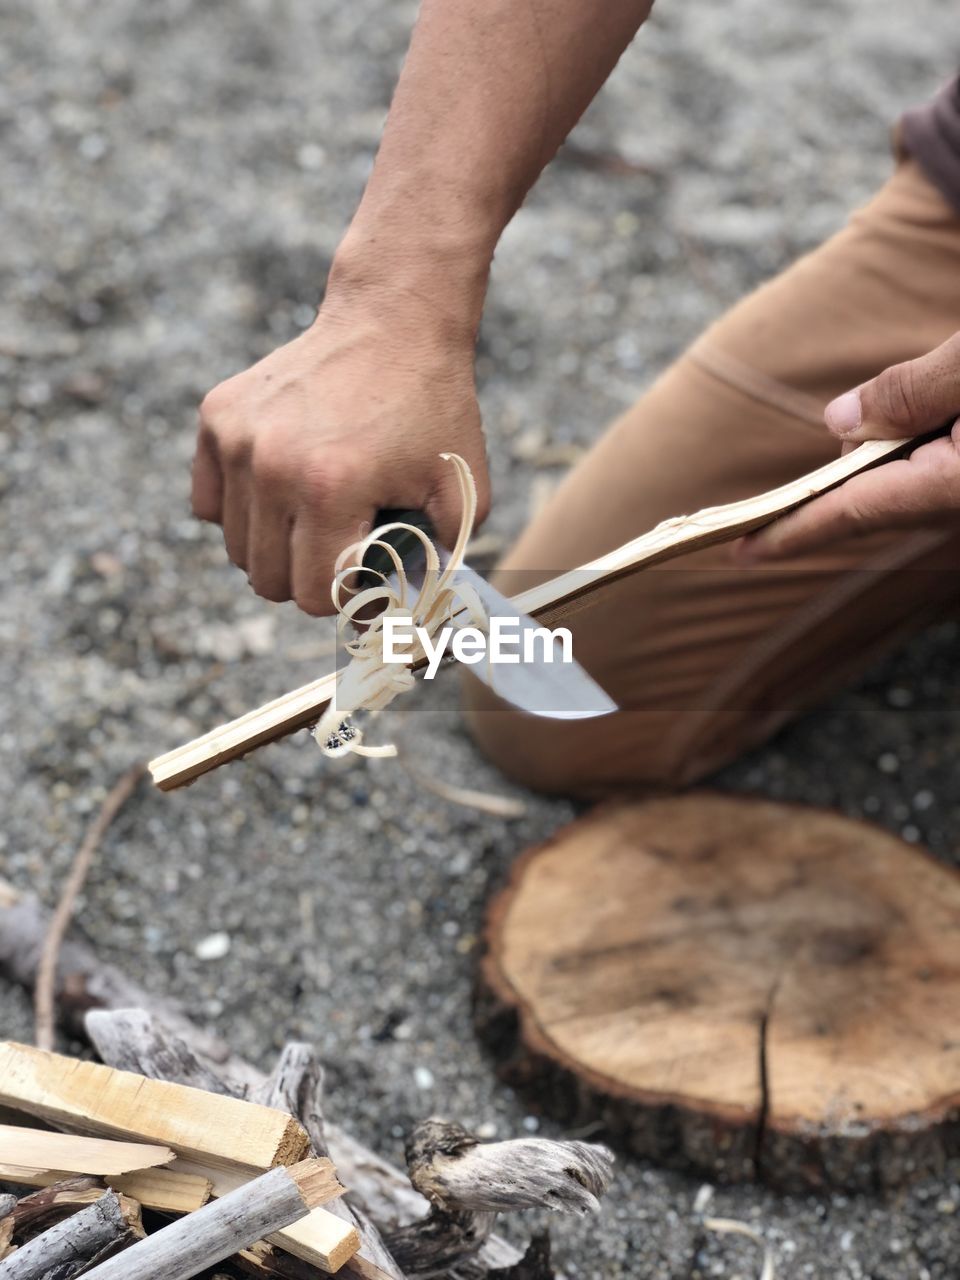 High angle view of man scraping wooden stick at campsite